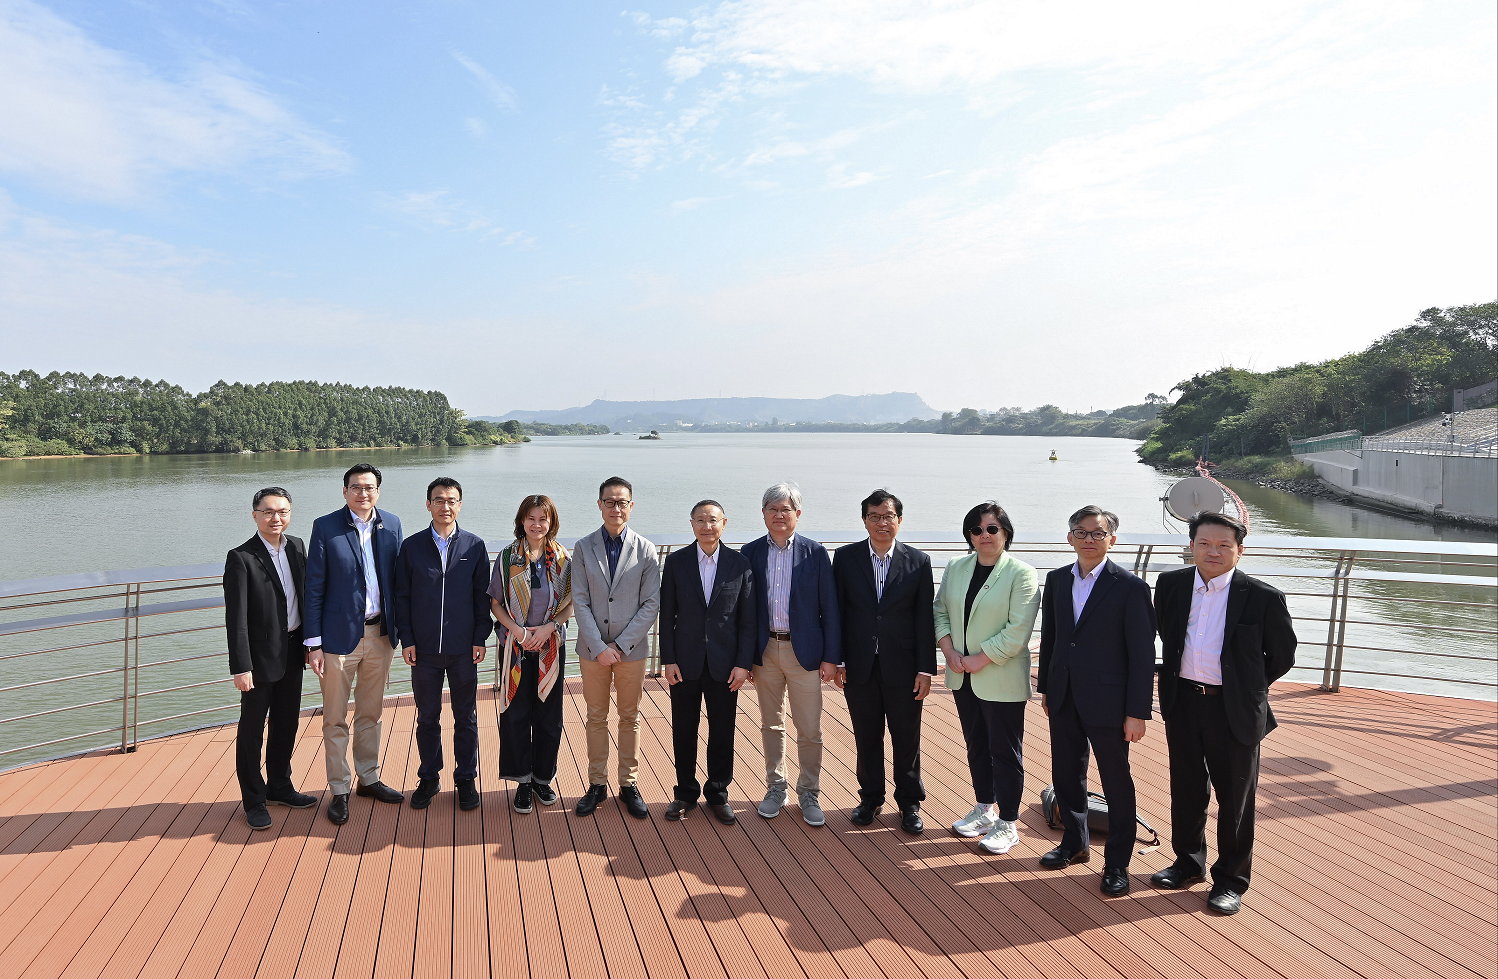 The Advisory Committee on Water Supplies (ACWS) delegation left for Guangdong Province yesterday (November 13) to visit the Dongjiang Water Supply System and returned to Hong Kong this afternoon (November 14). Photo shows the Chairman of the ACWS, Professor Joseph Kwan (sixth left), and the Director of Water Supplies, Mr Tony Yau (fifth left), with members of the Committee at the intake point of Dongjiang water supplied to Hong Kong at the Taiyuan Pumping Station in Dongguan this morning.